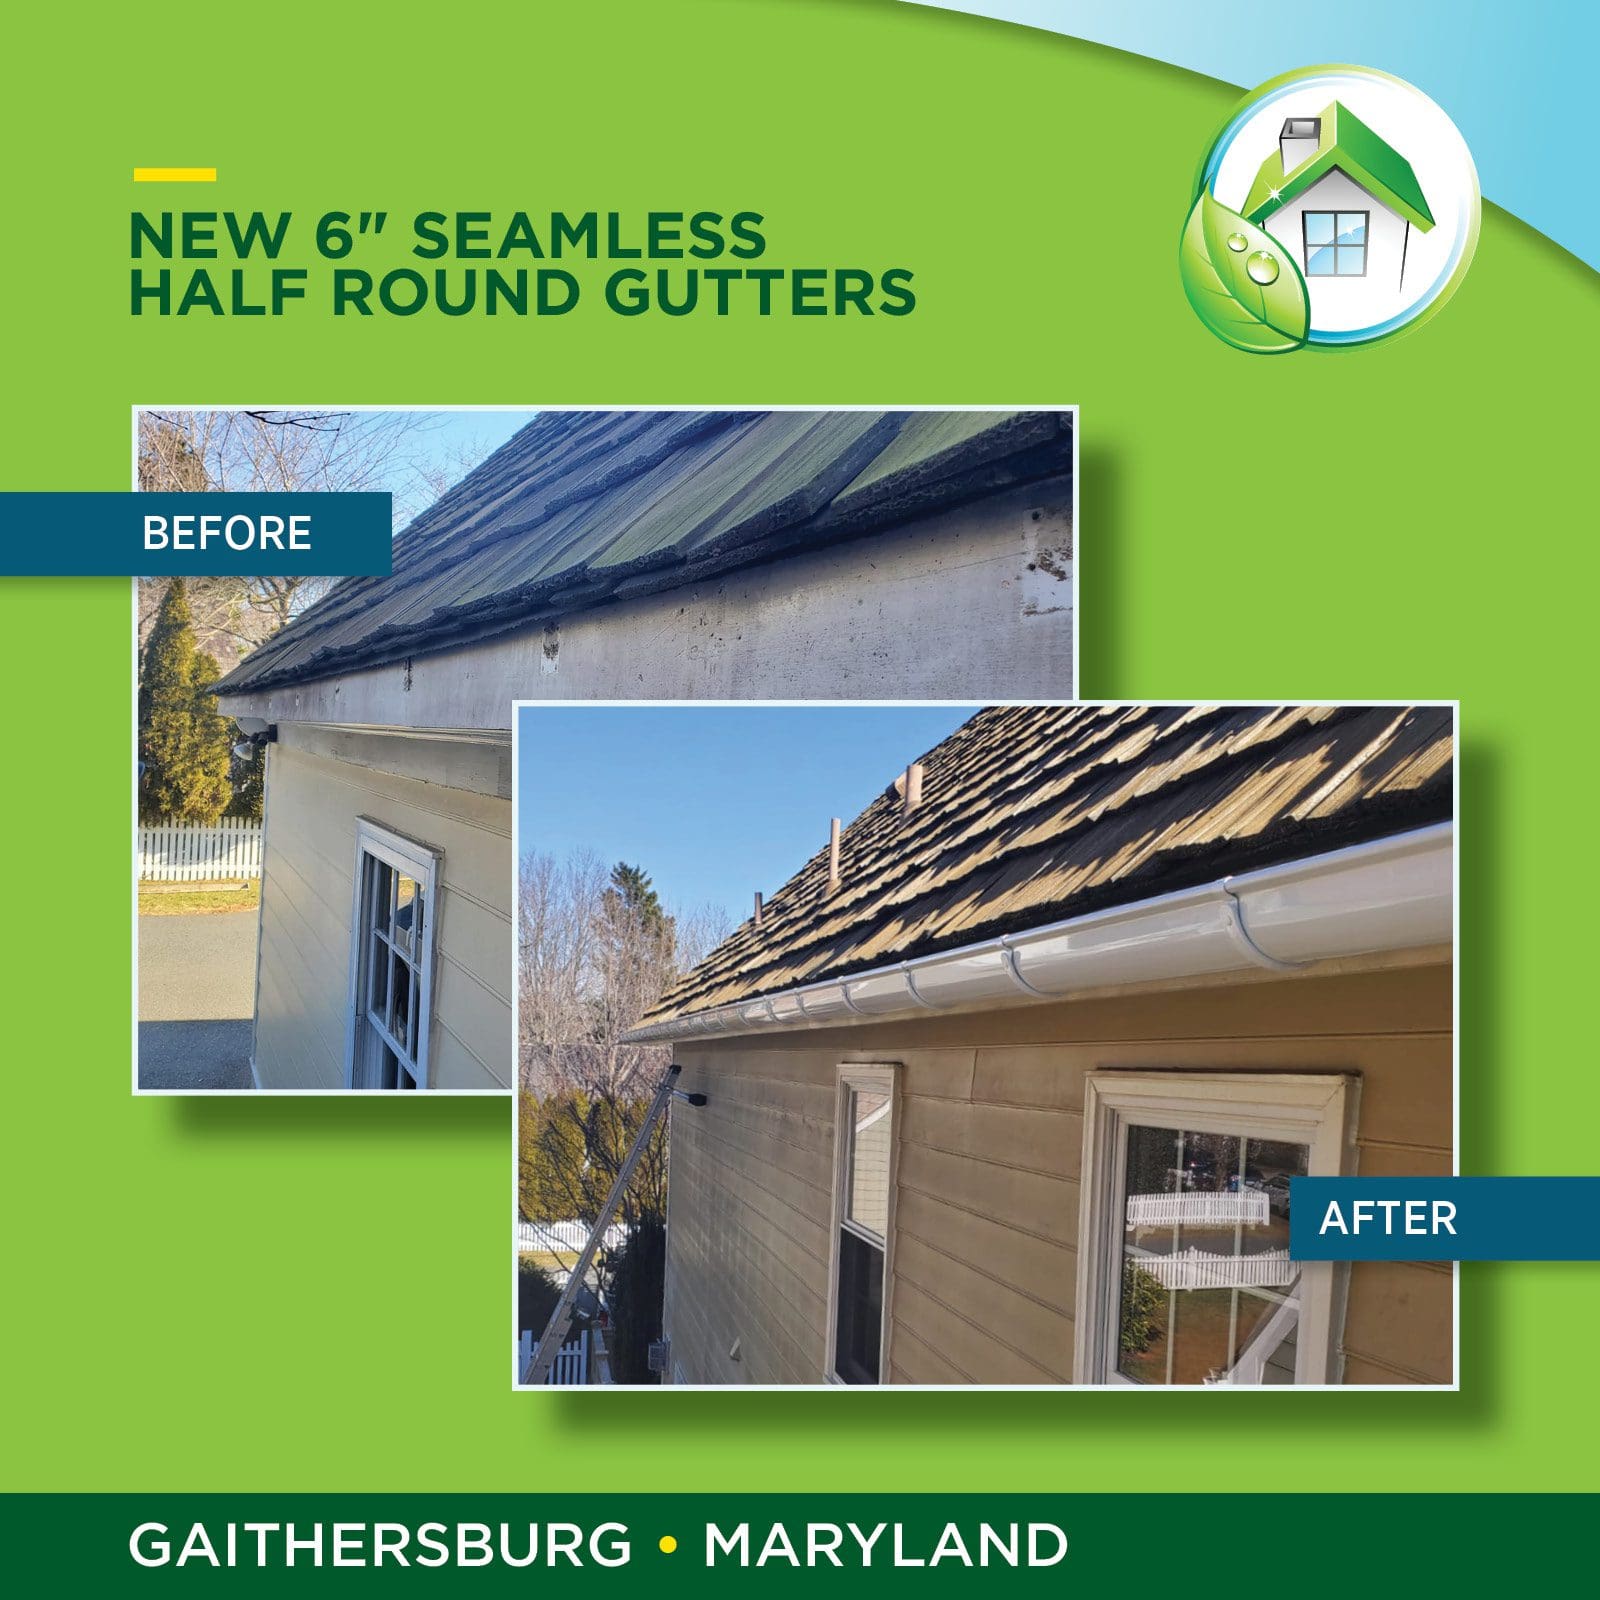 Before and after new 6" seamless half round gutters in Gaithersburg Maryland